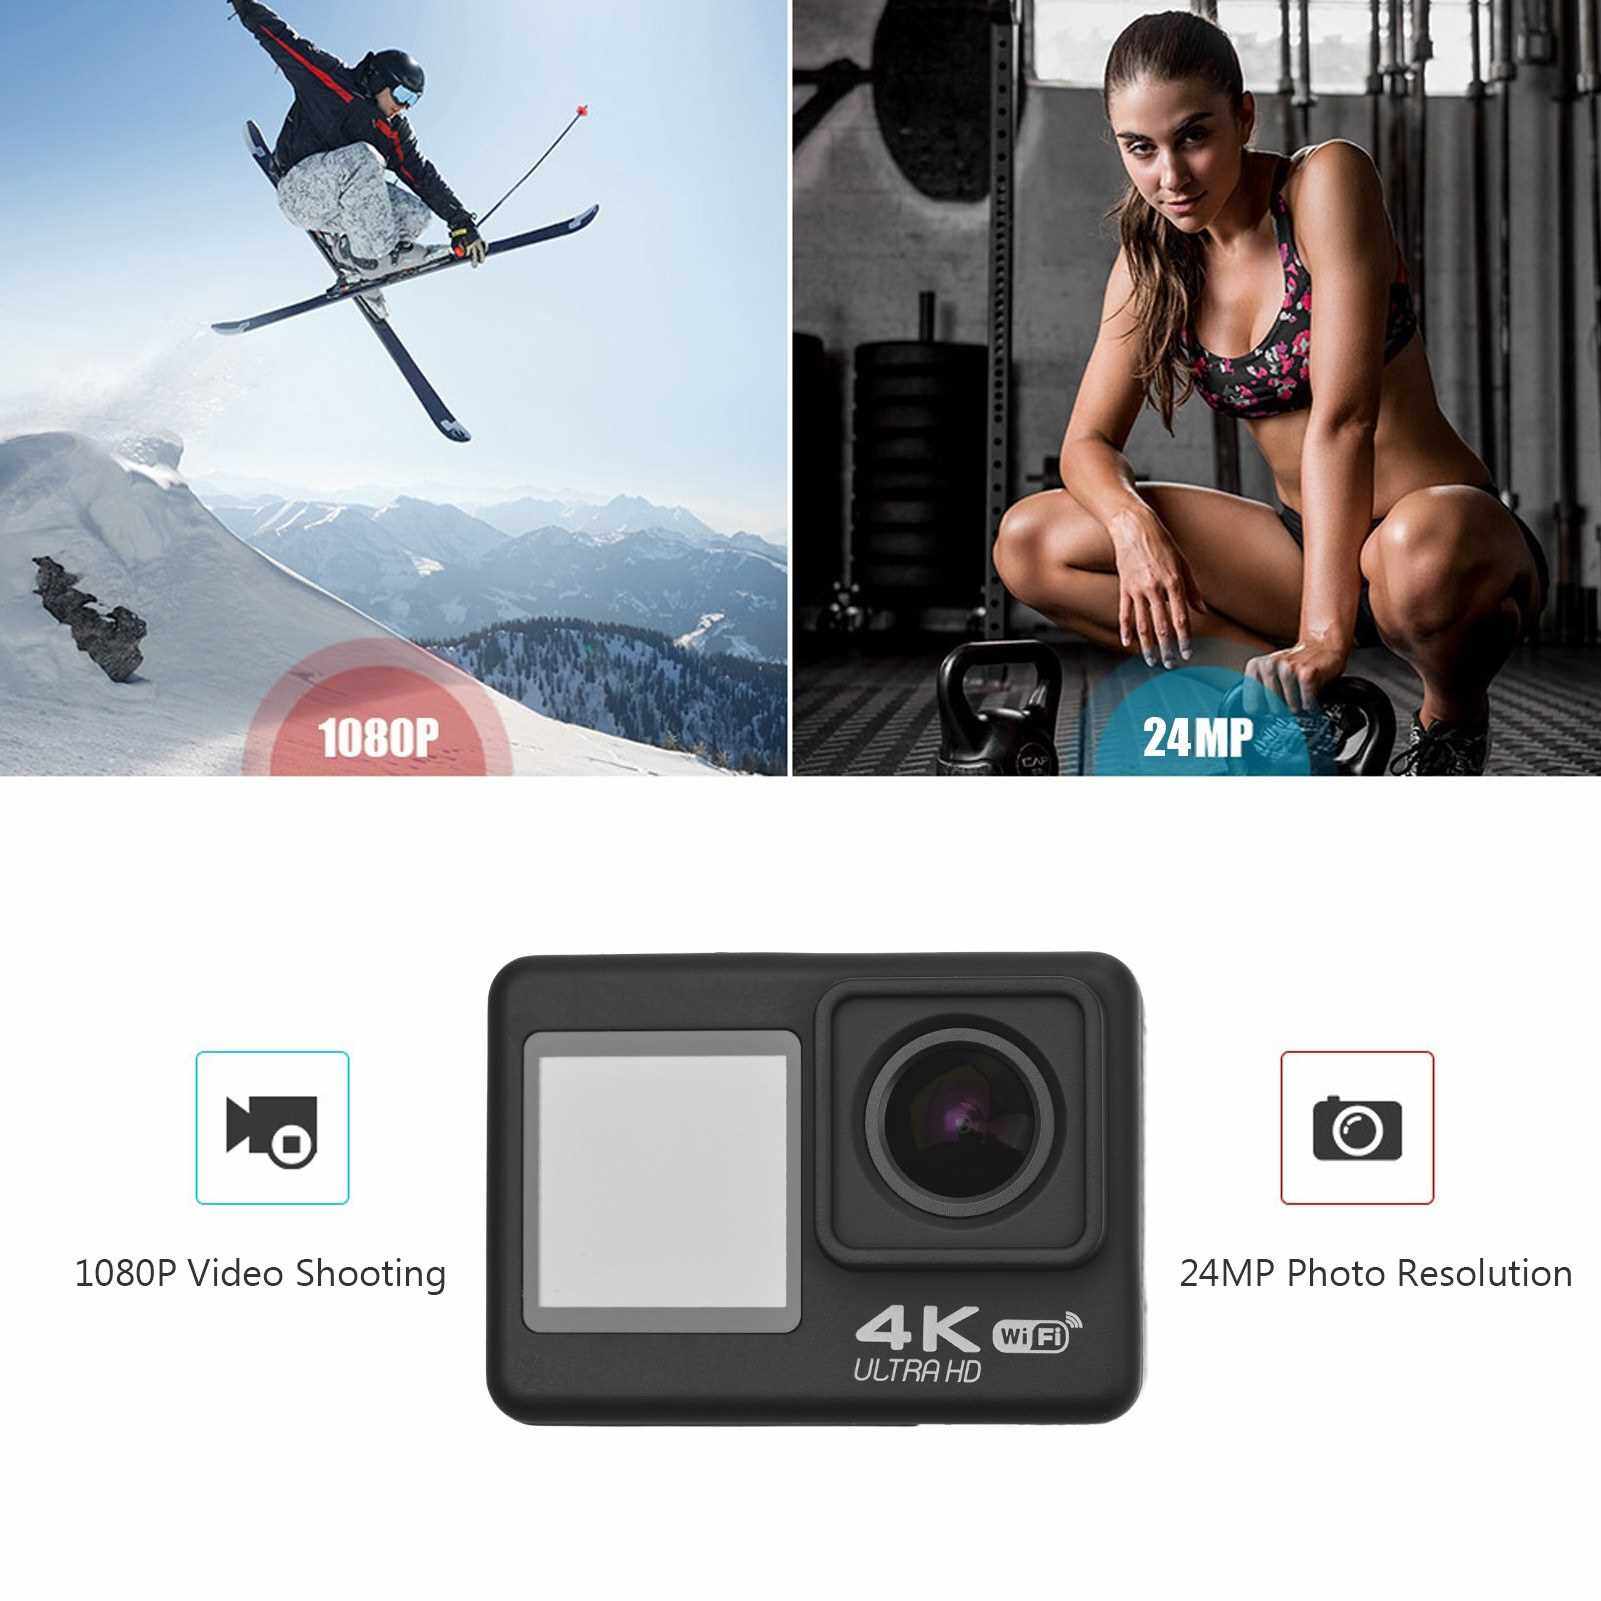 4K60FPS Ultra High Definition WiFi Action Camera Dual Screen 170 Wide Angle 30 Meters Waterproof with Remote Control 1 Li-ion Battery Mounting Accessories Kit Black (Standard)